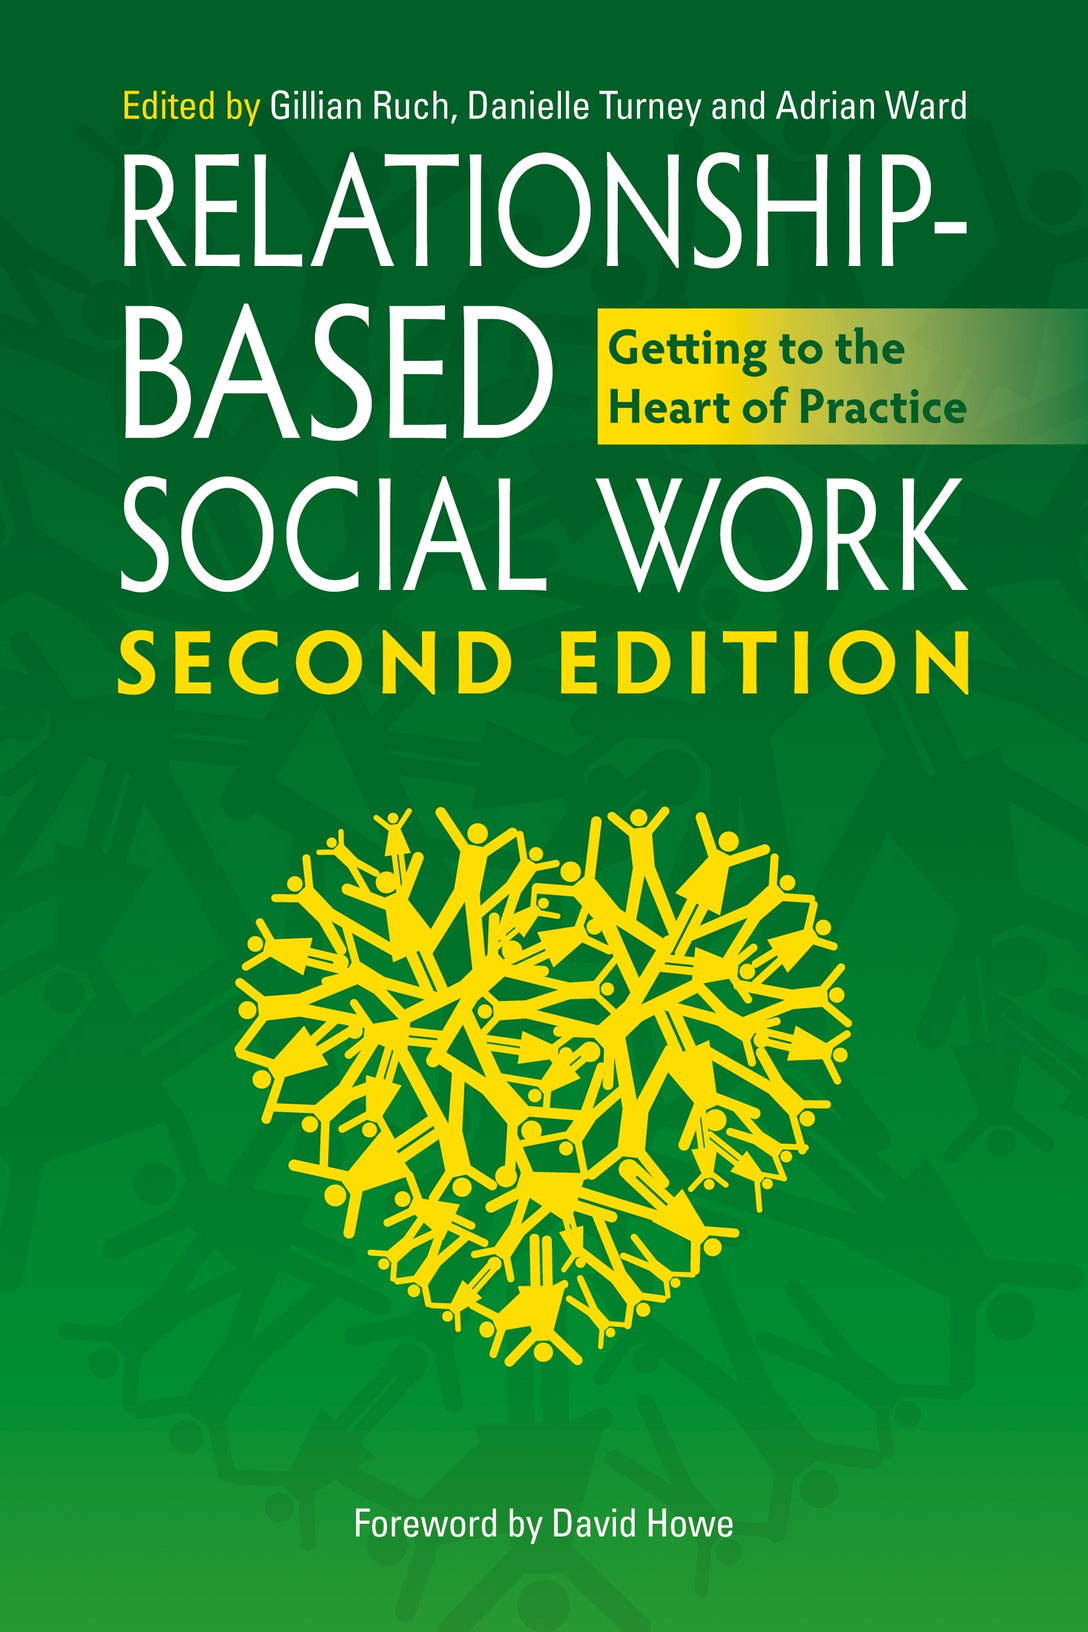 Relationship-Based Social Work, Second Edition by Gillian Ruch, Danielle Turney, Adrian Ward, David Howe, No Author Listed